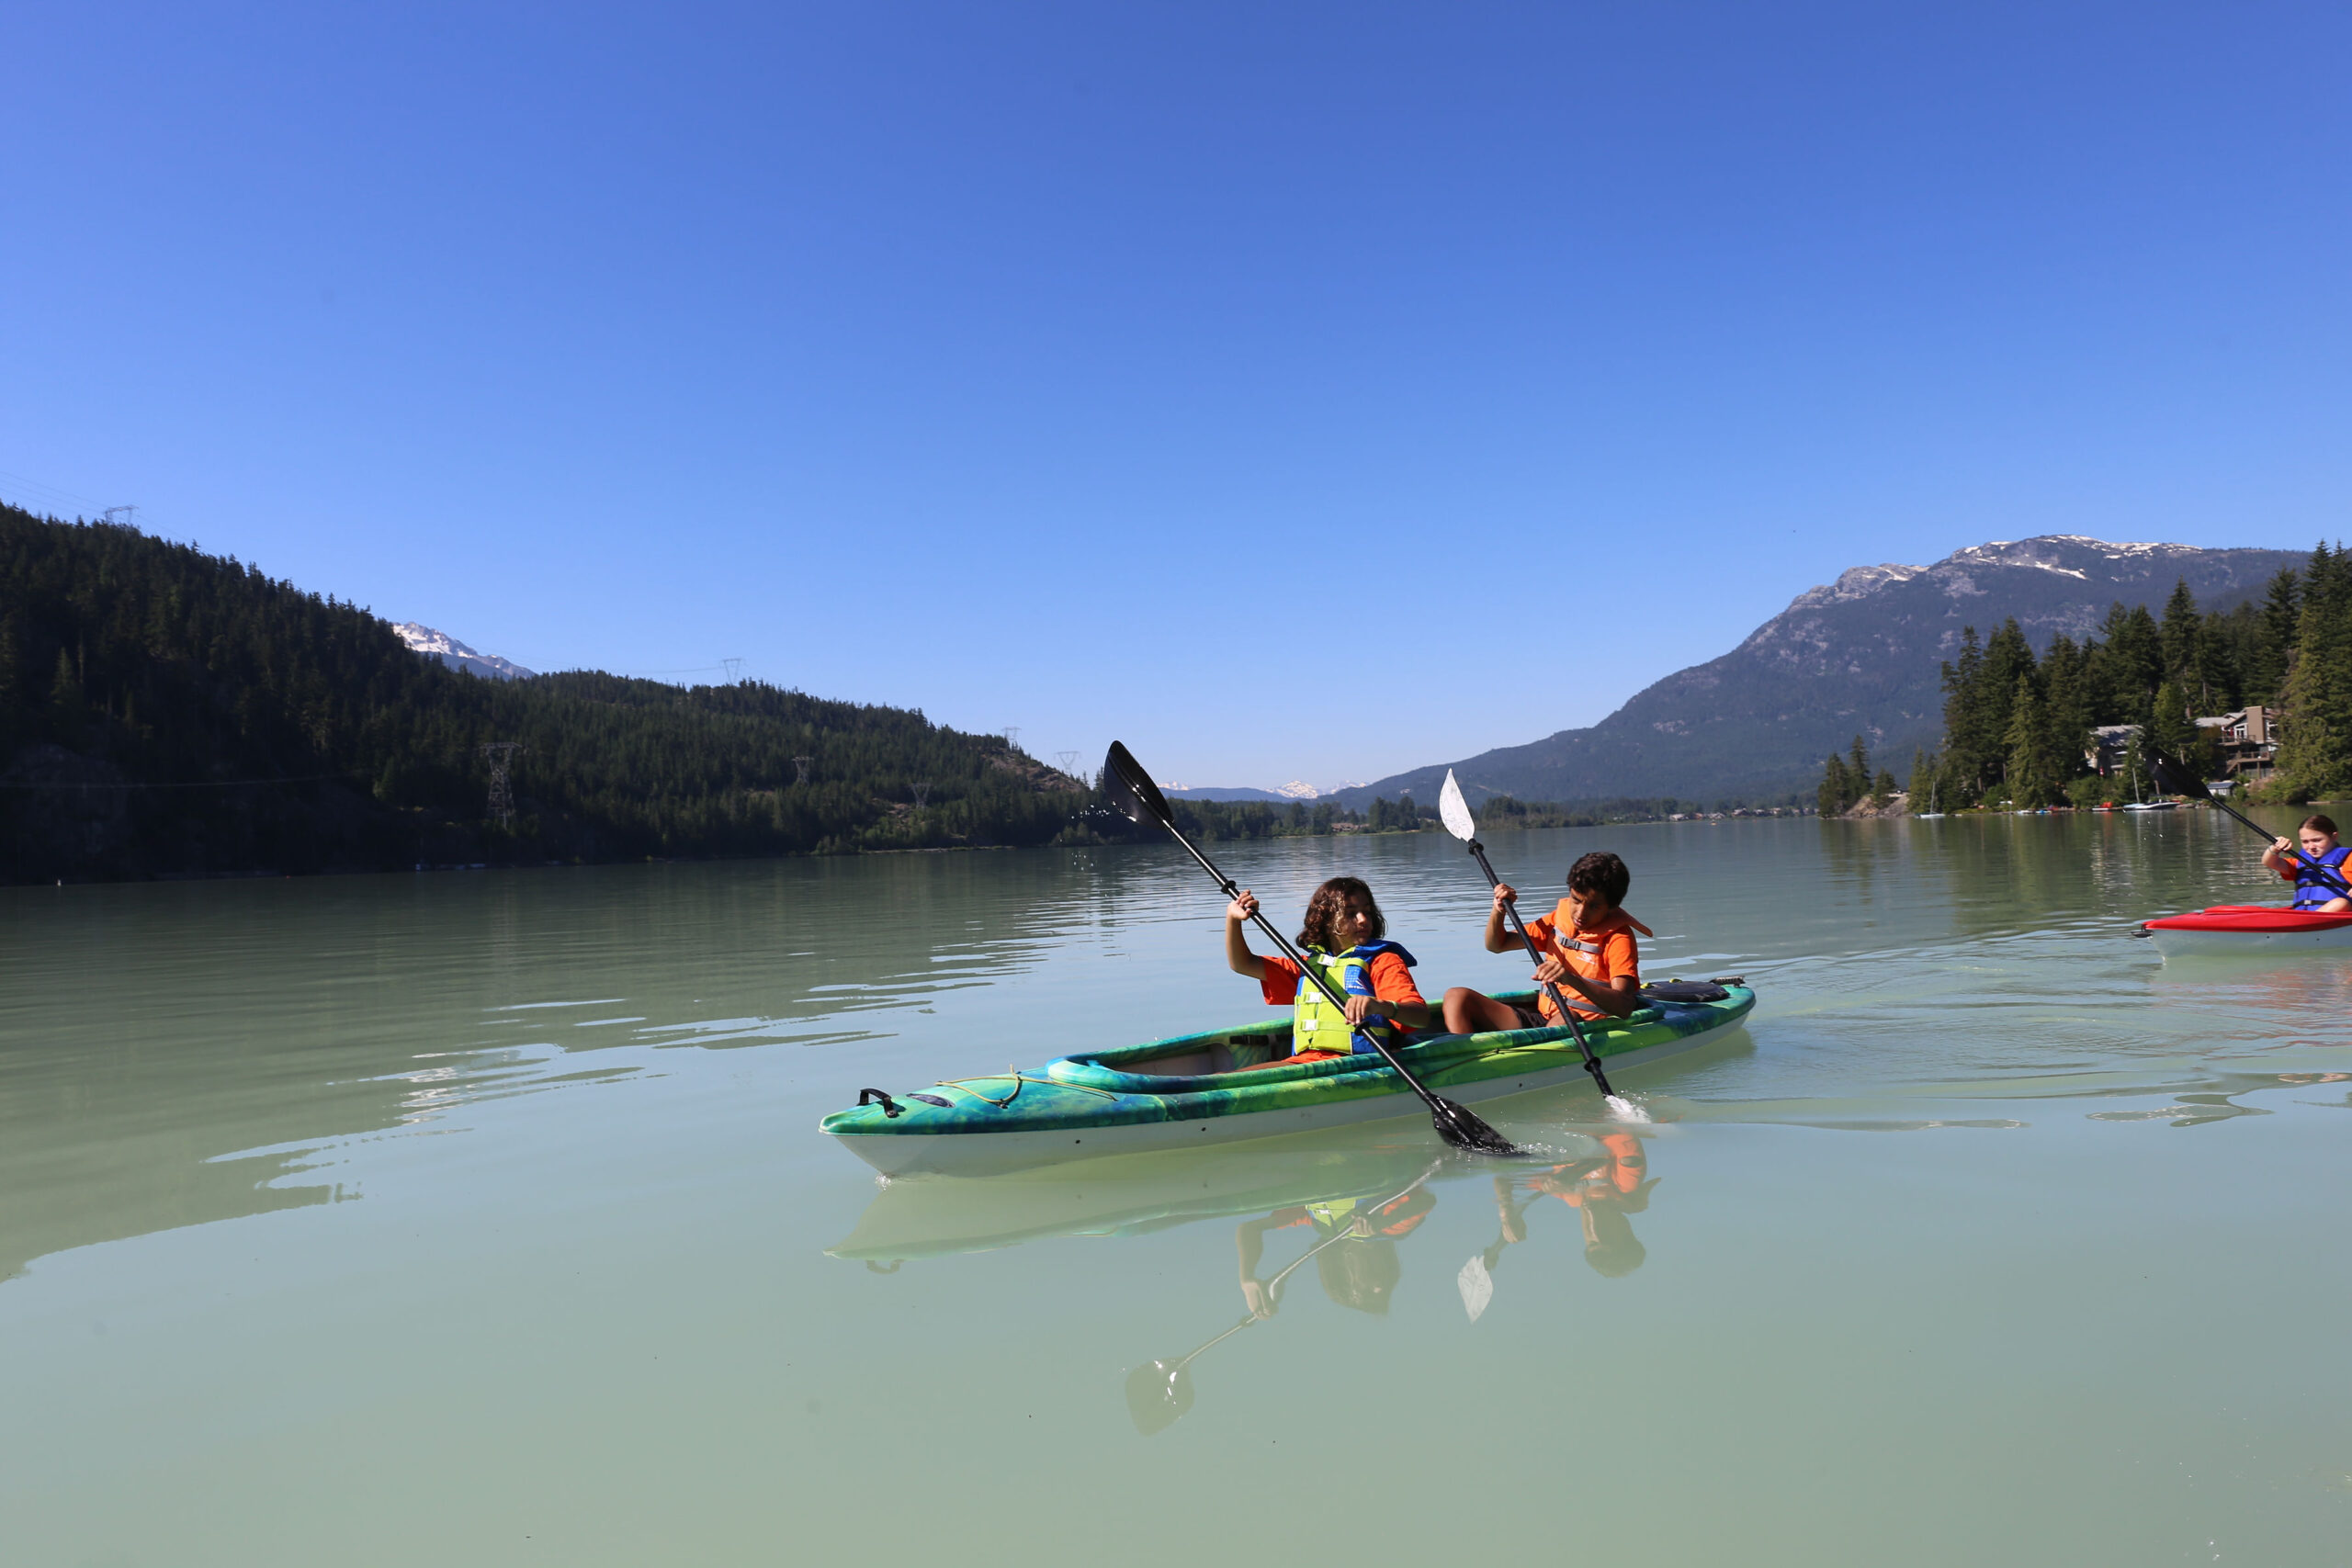 Adventure camp in Whistler during a summer camp in Canada. We see two campers on a kayak on a pristine lake